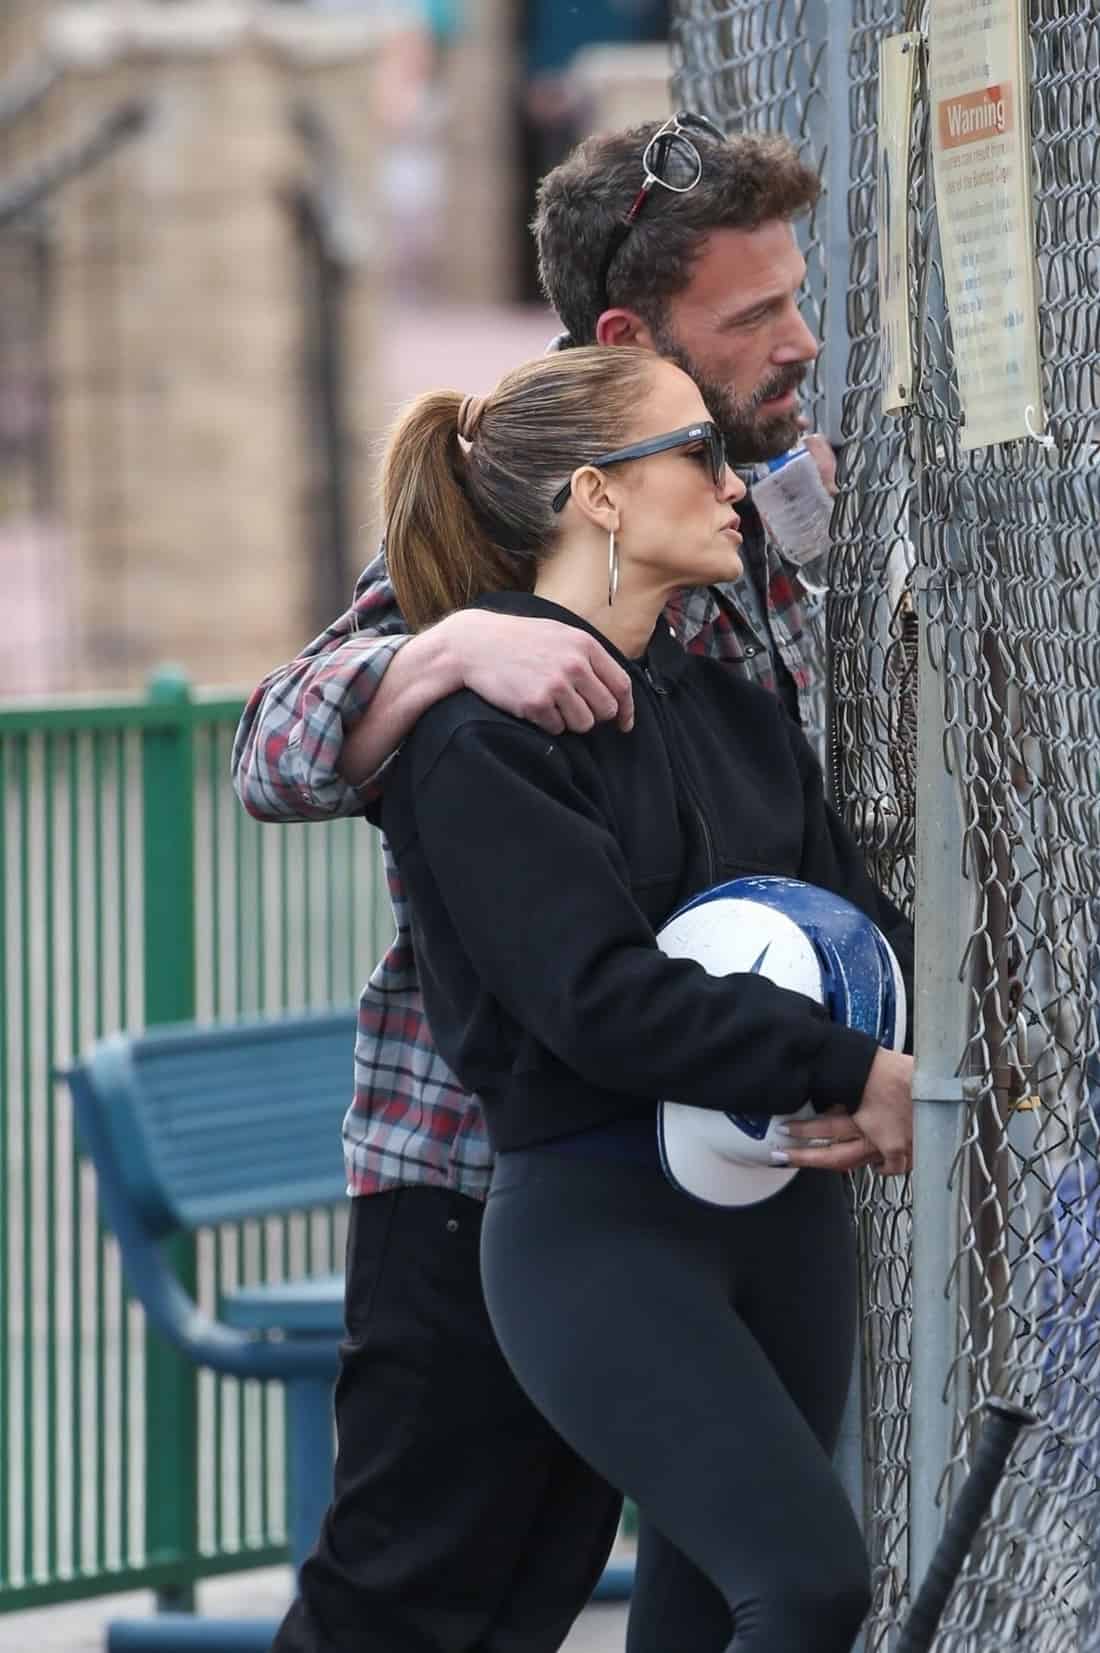 Jennifer Lopez Swings and Misses at the Batting Cage on a Date with Affleck